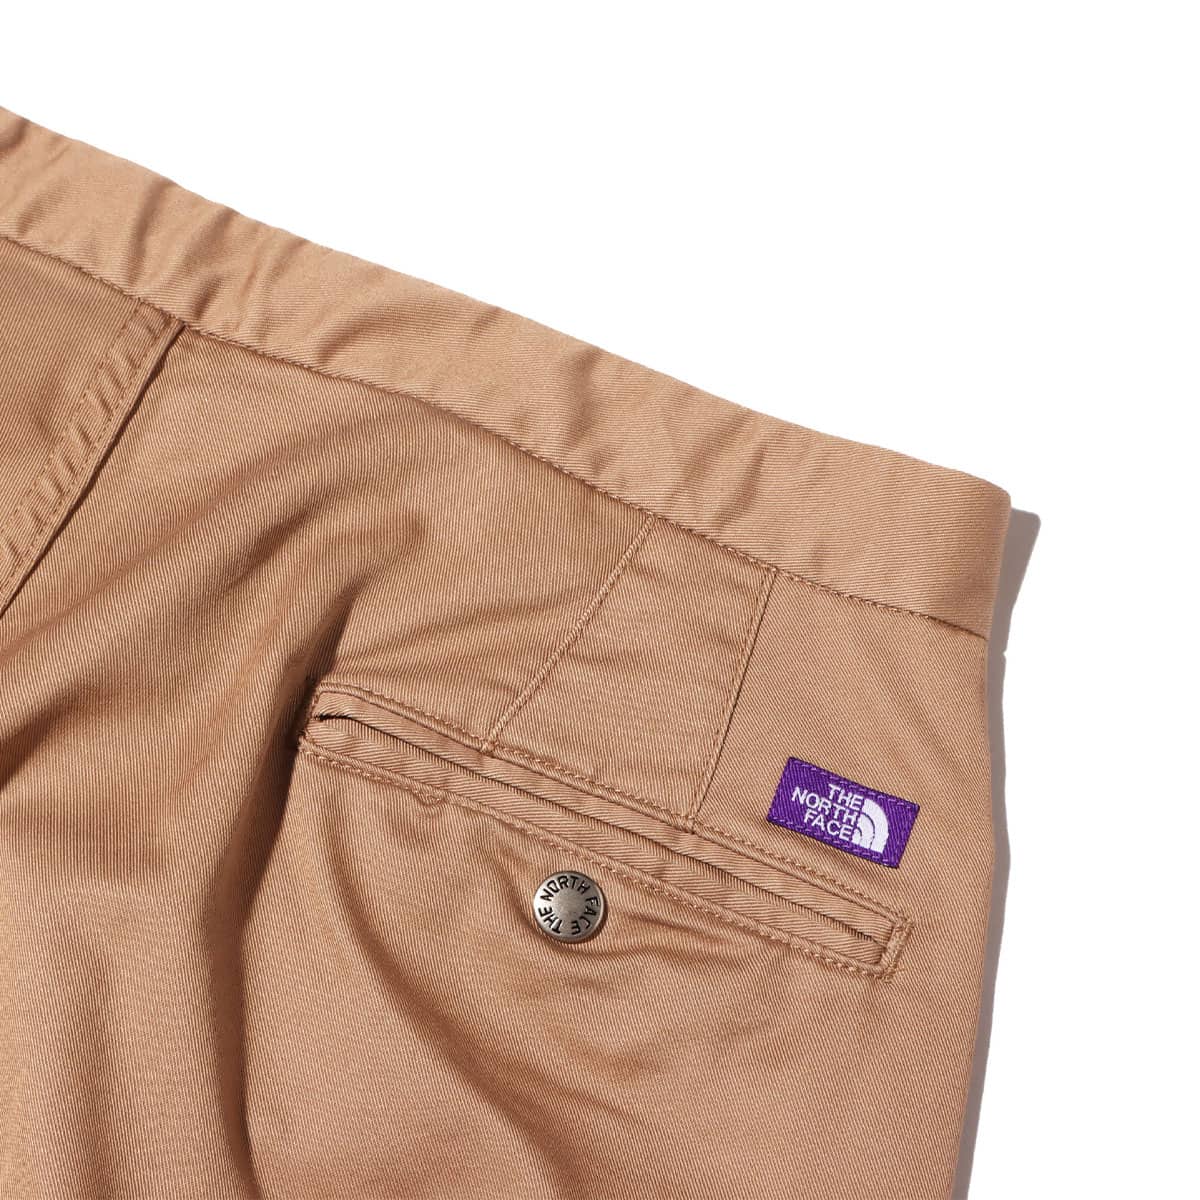 THE NORTH FACE PURPLE LABEL STRETCH TWILL WIDE TAPERED PANTS TAN 21FW-I